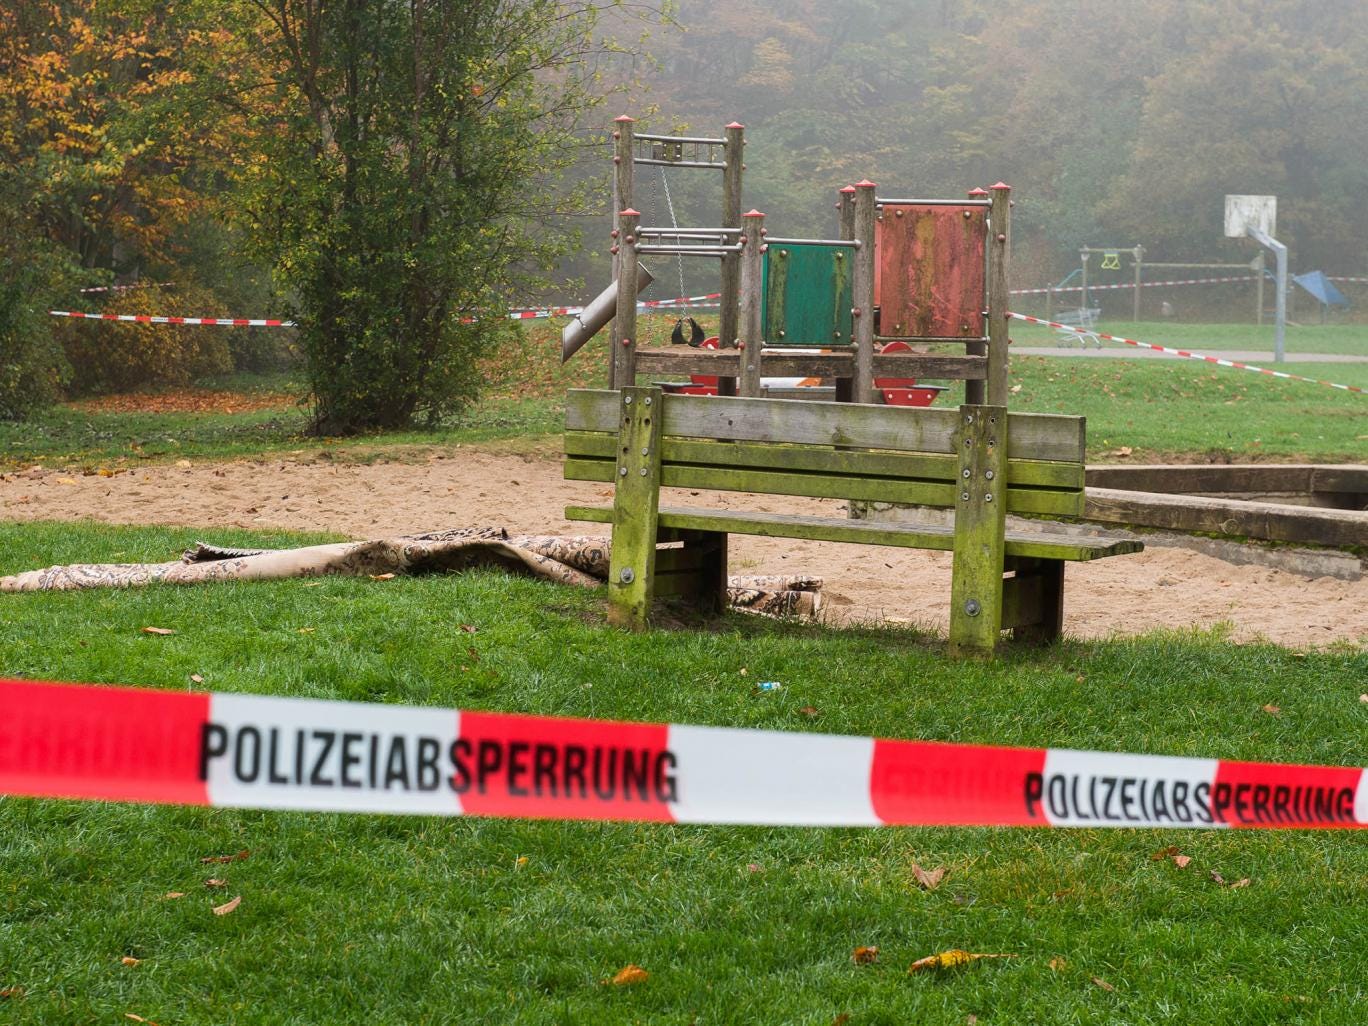 Spontaneous Human Combustion: Woman bursts into flames on park bench in Germany